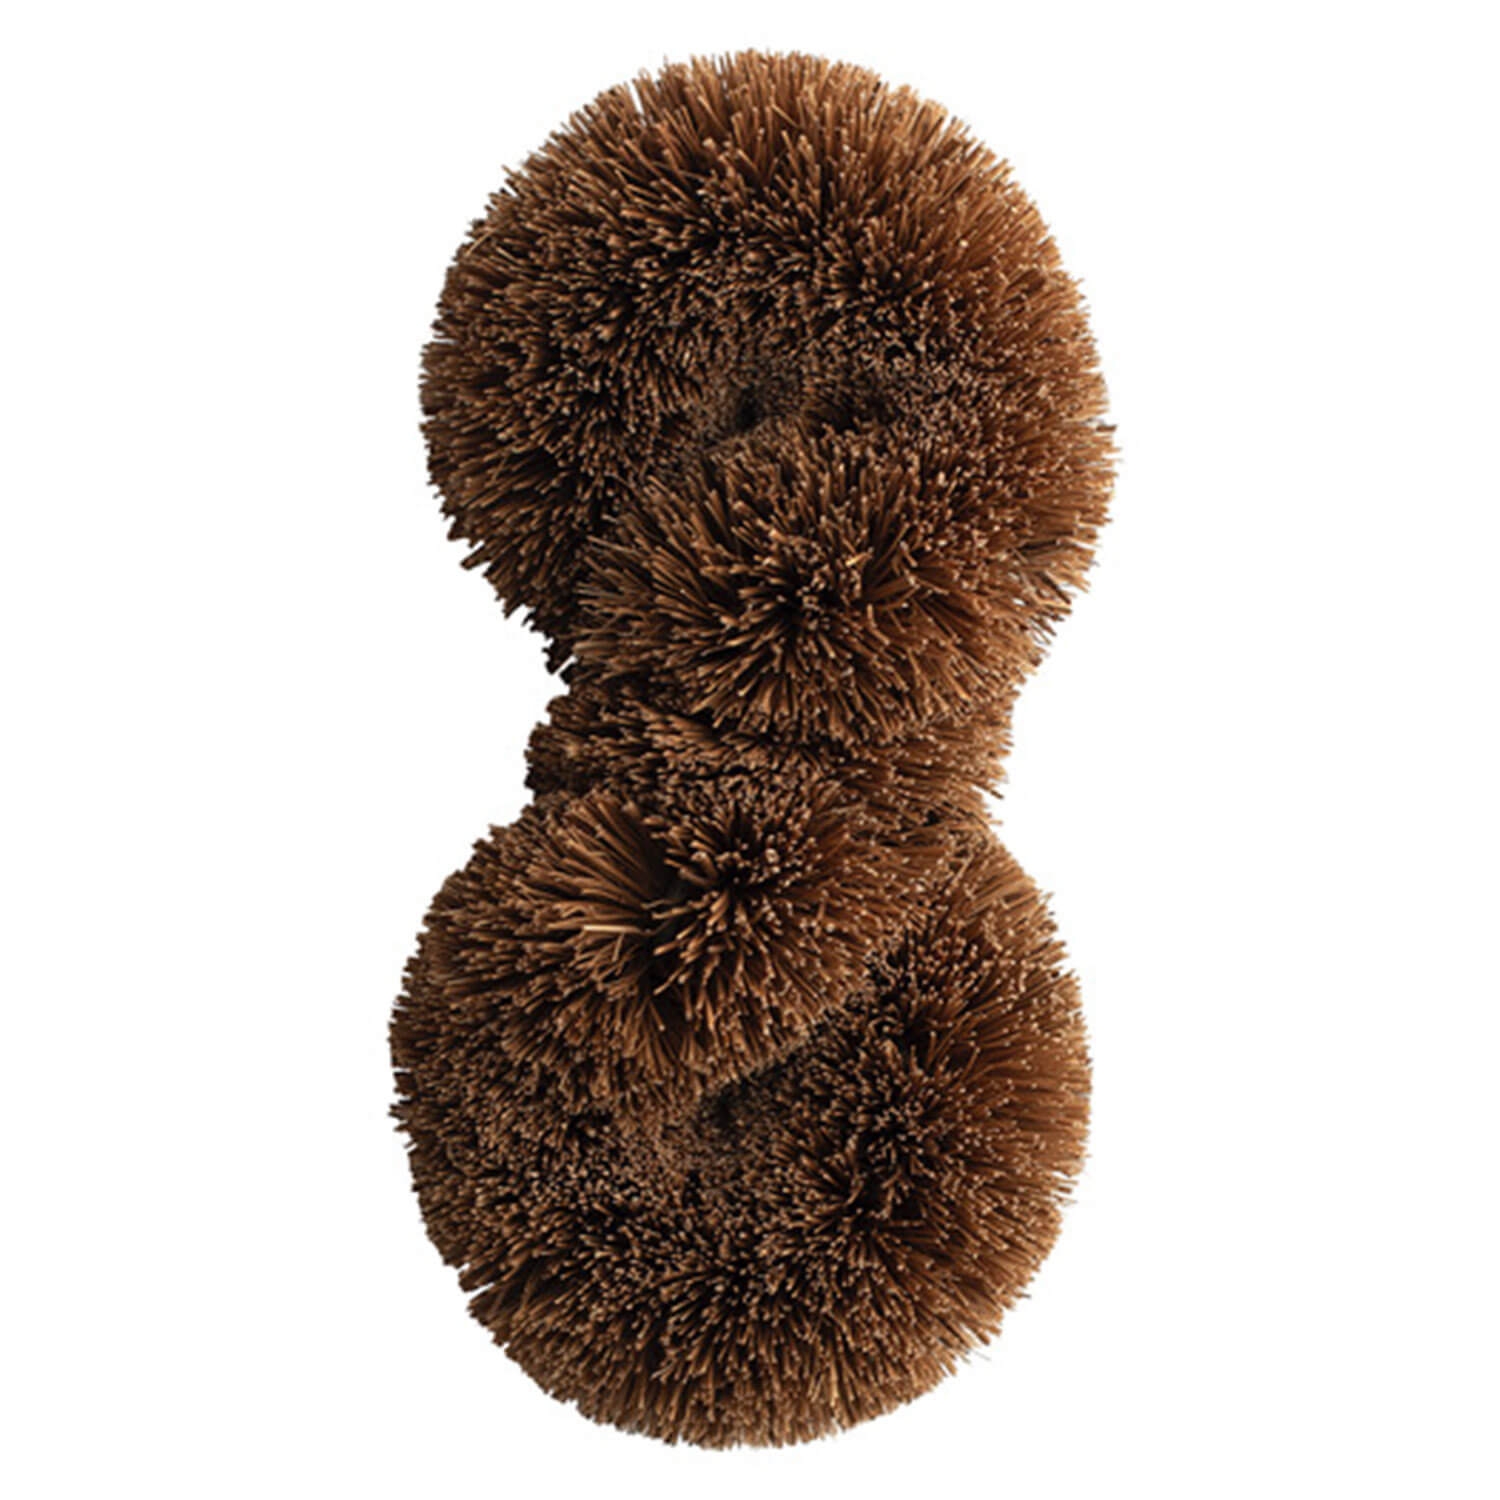 Product image from SIMPLE GOODS - Twist Scrubber